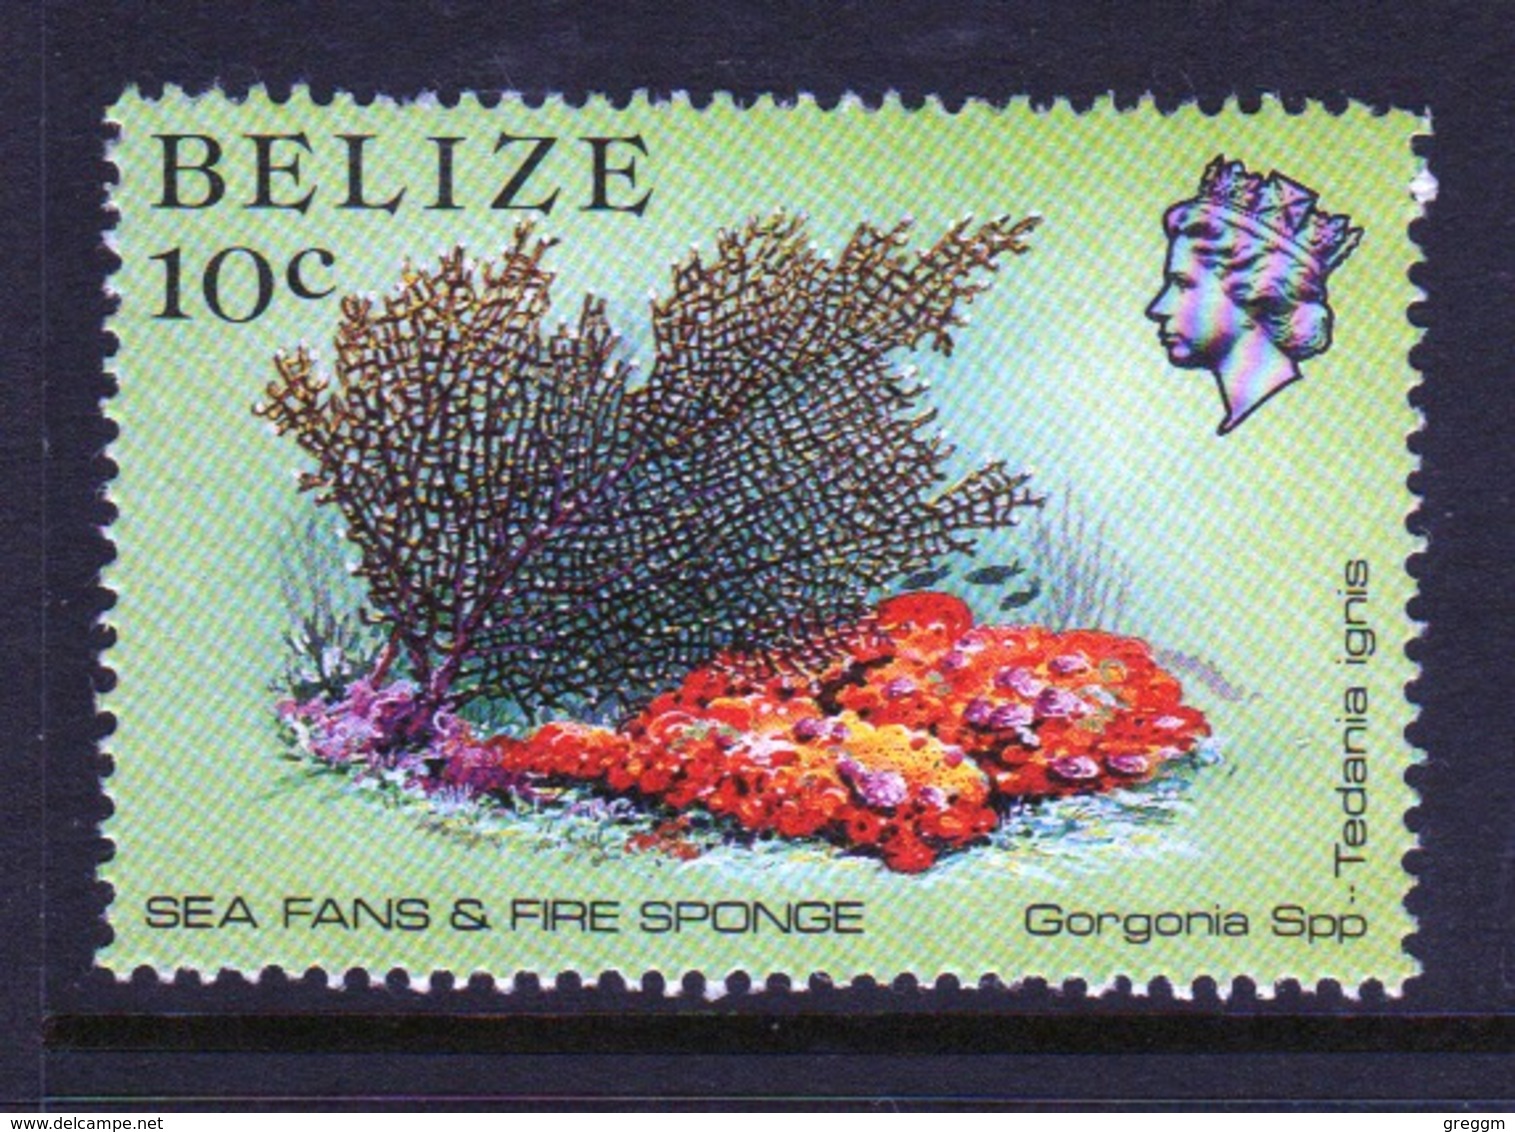 Belize 1984 Single 10 Cent Definitive Stamp From The Marine Life Of The Belize Coral Reef. - Belize (1973-...)